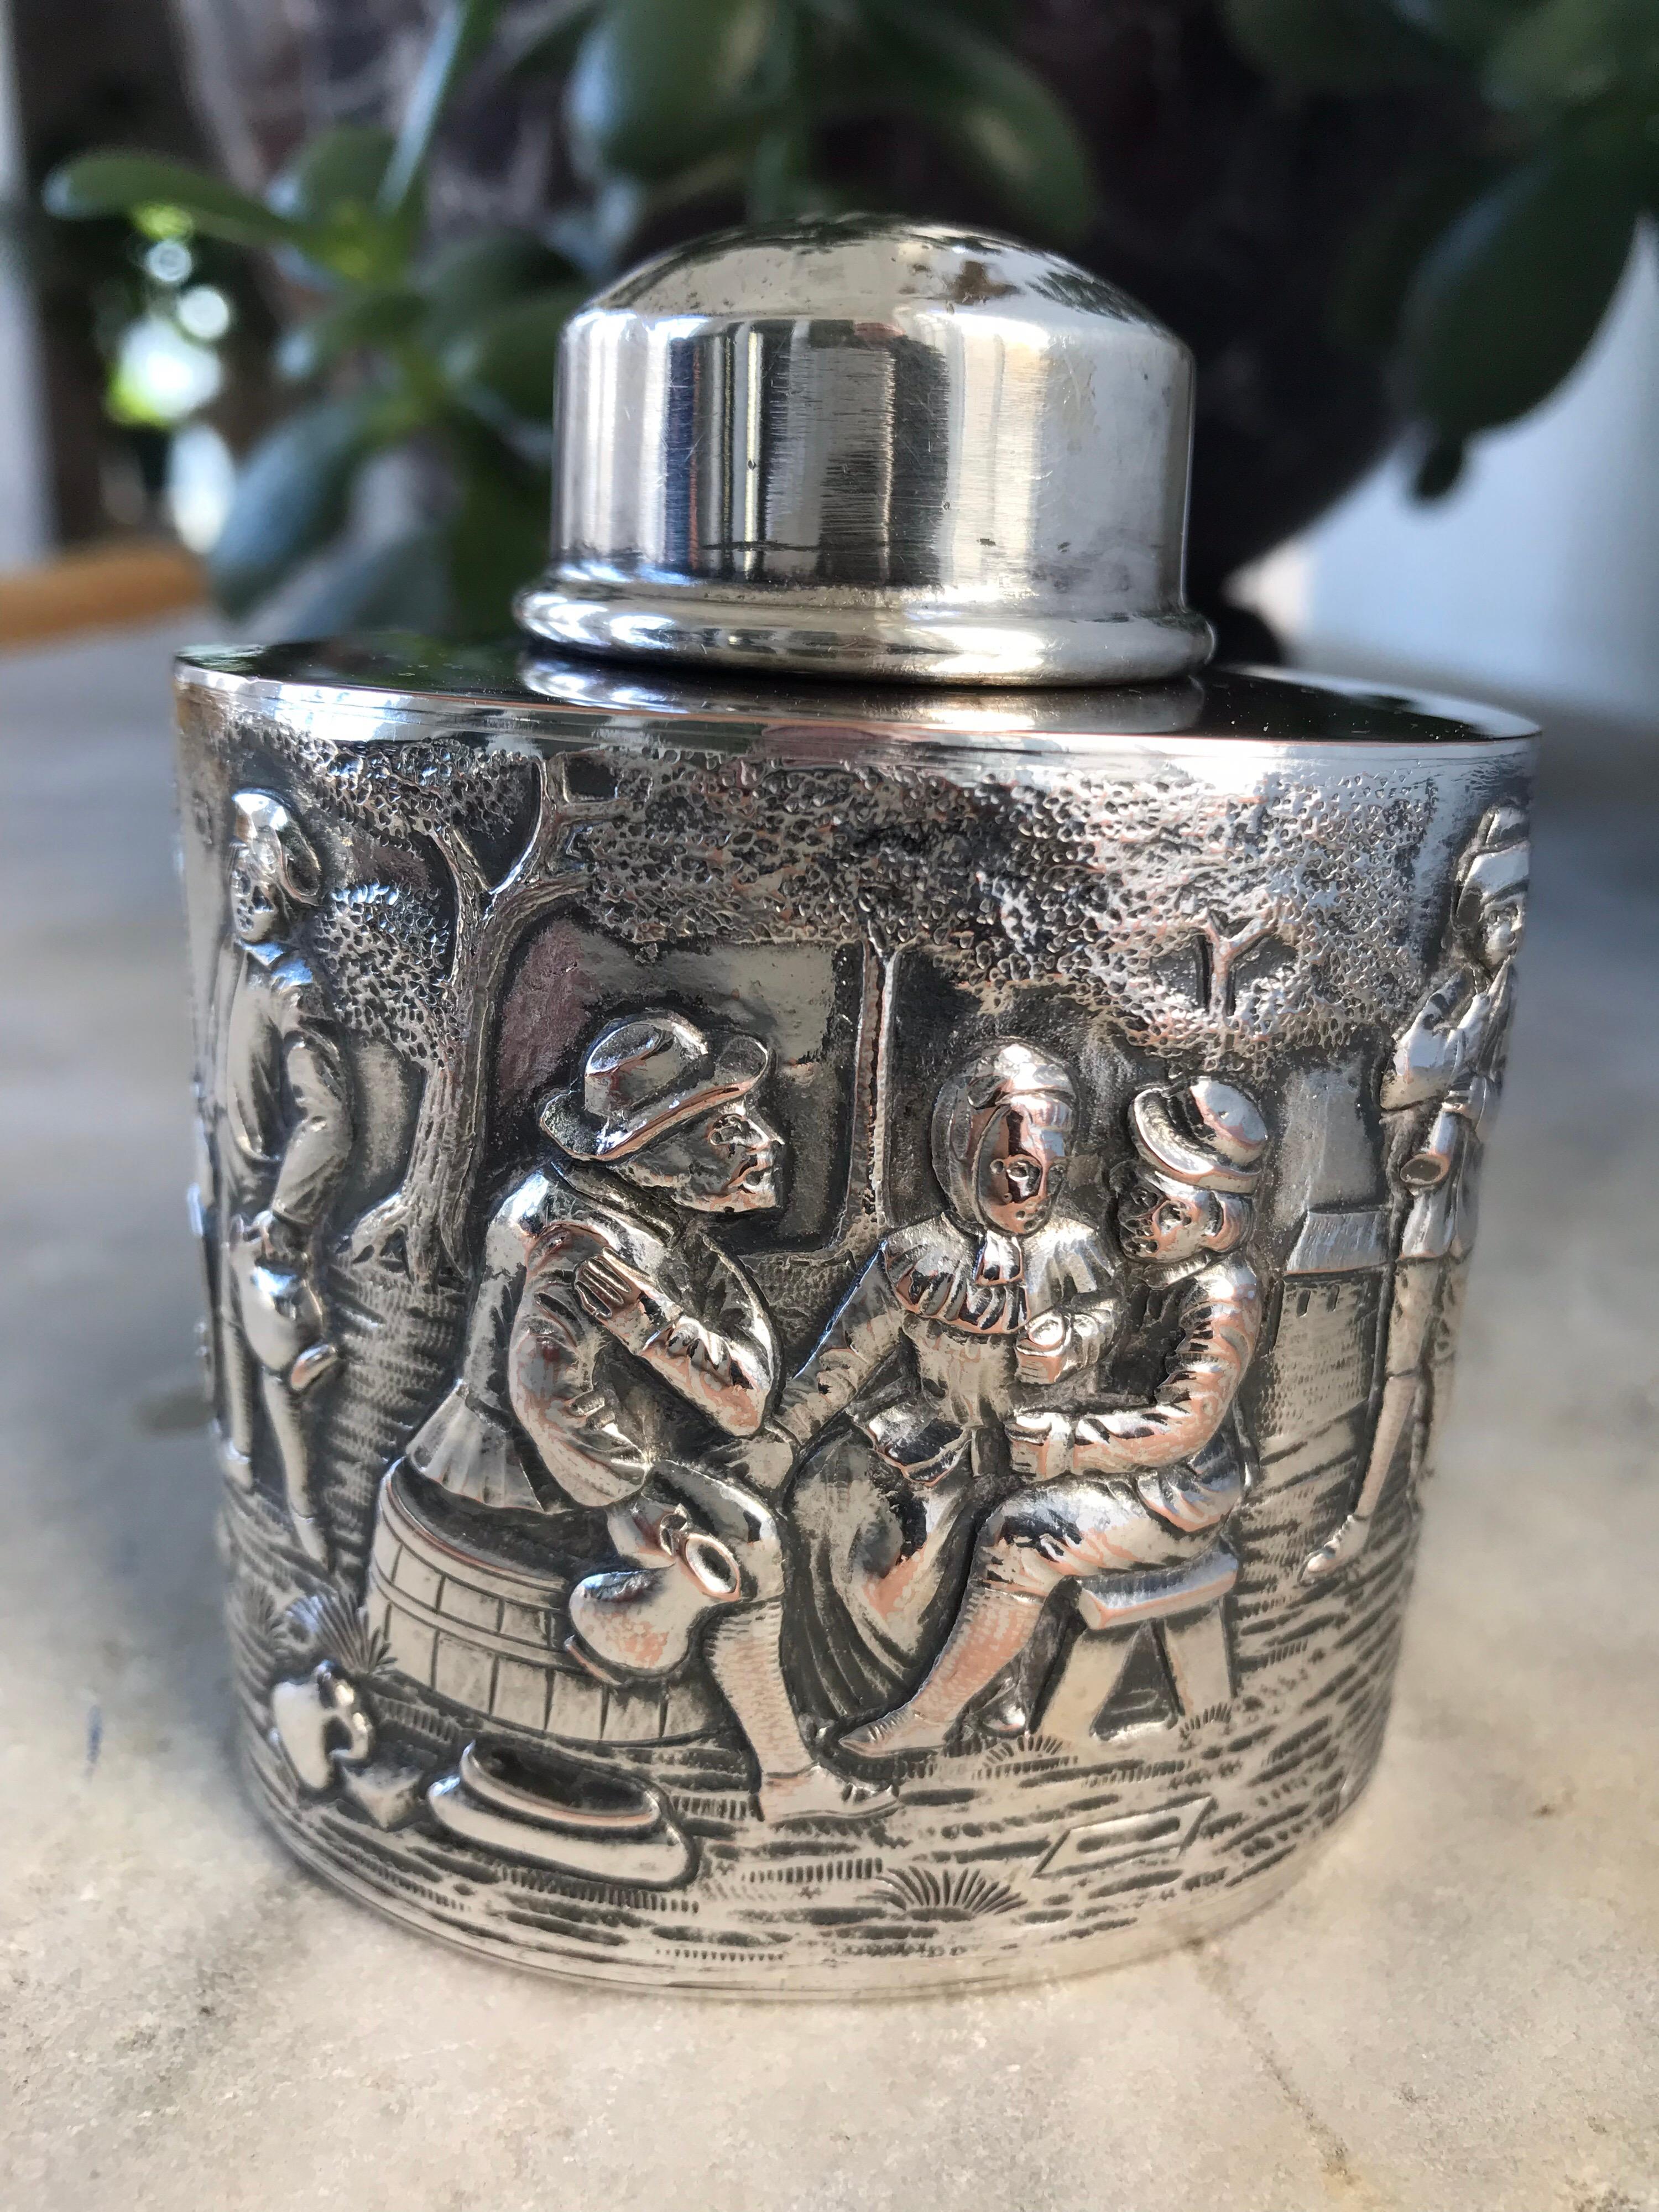 Antique silver plated tea caddy with high reliefs of a village scene surrounding the entire body of the tea caddy, illustrating musicians, dancers, taverner, a group socializing and drinking, and a very charming dog looking on. This quality caddy